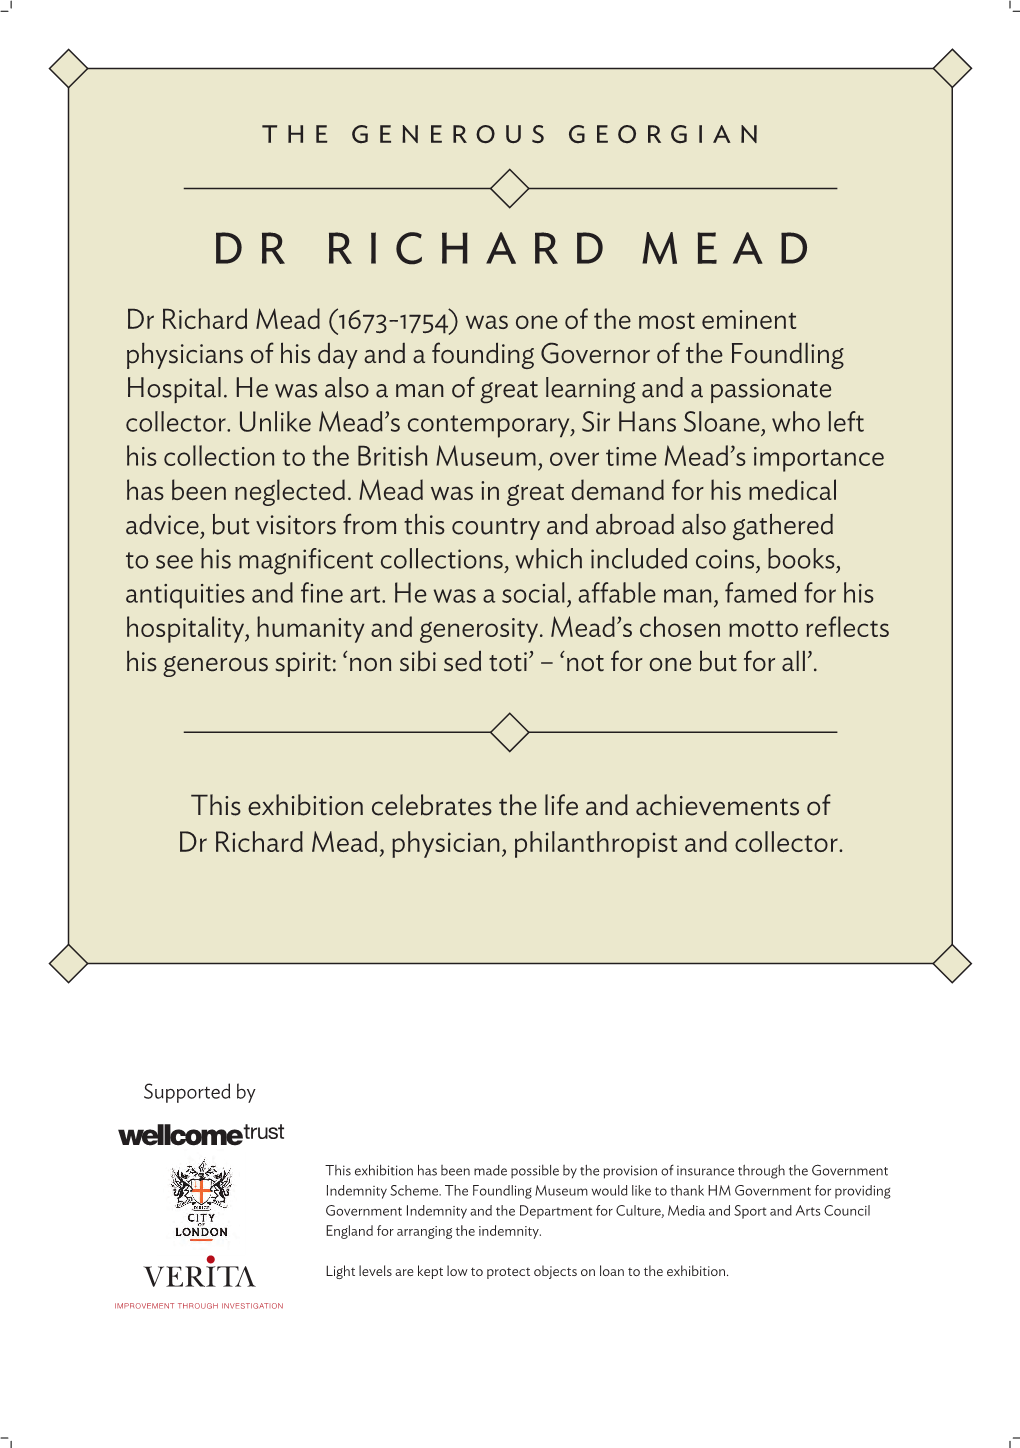 This Exhibition Celebrates the Life and Achievements of Dr Richard Mead, Physician, Philanthropist and Collector